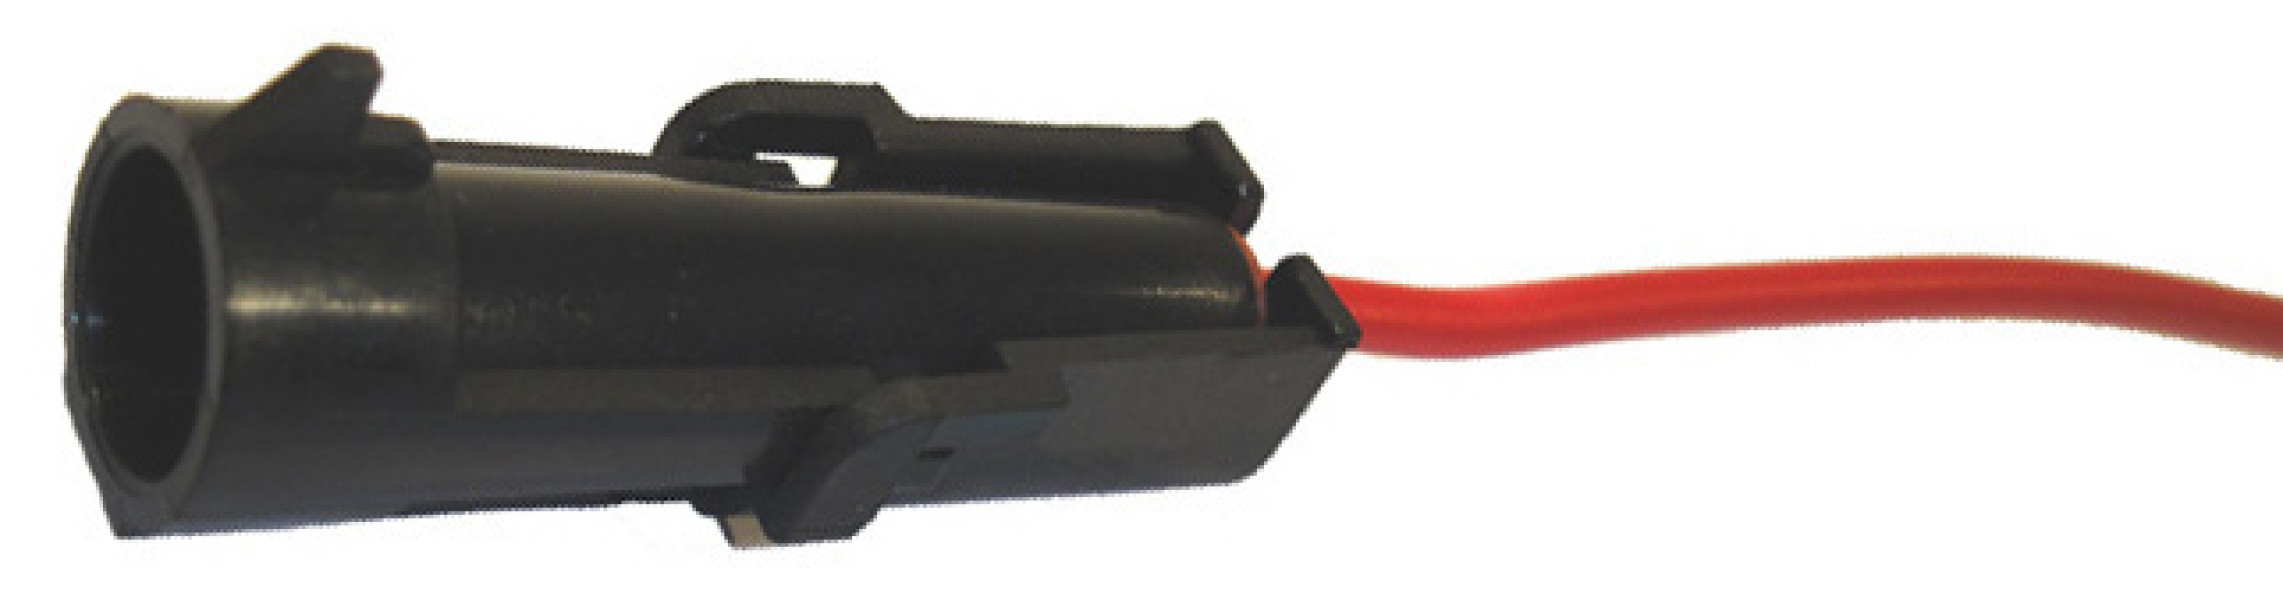 Image of A/C Compressor Clutch Connector from Sunair. Part number: PT-4066